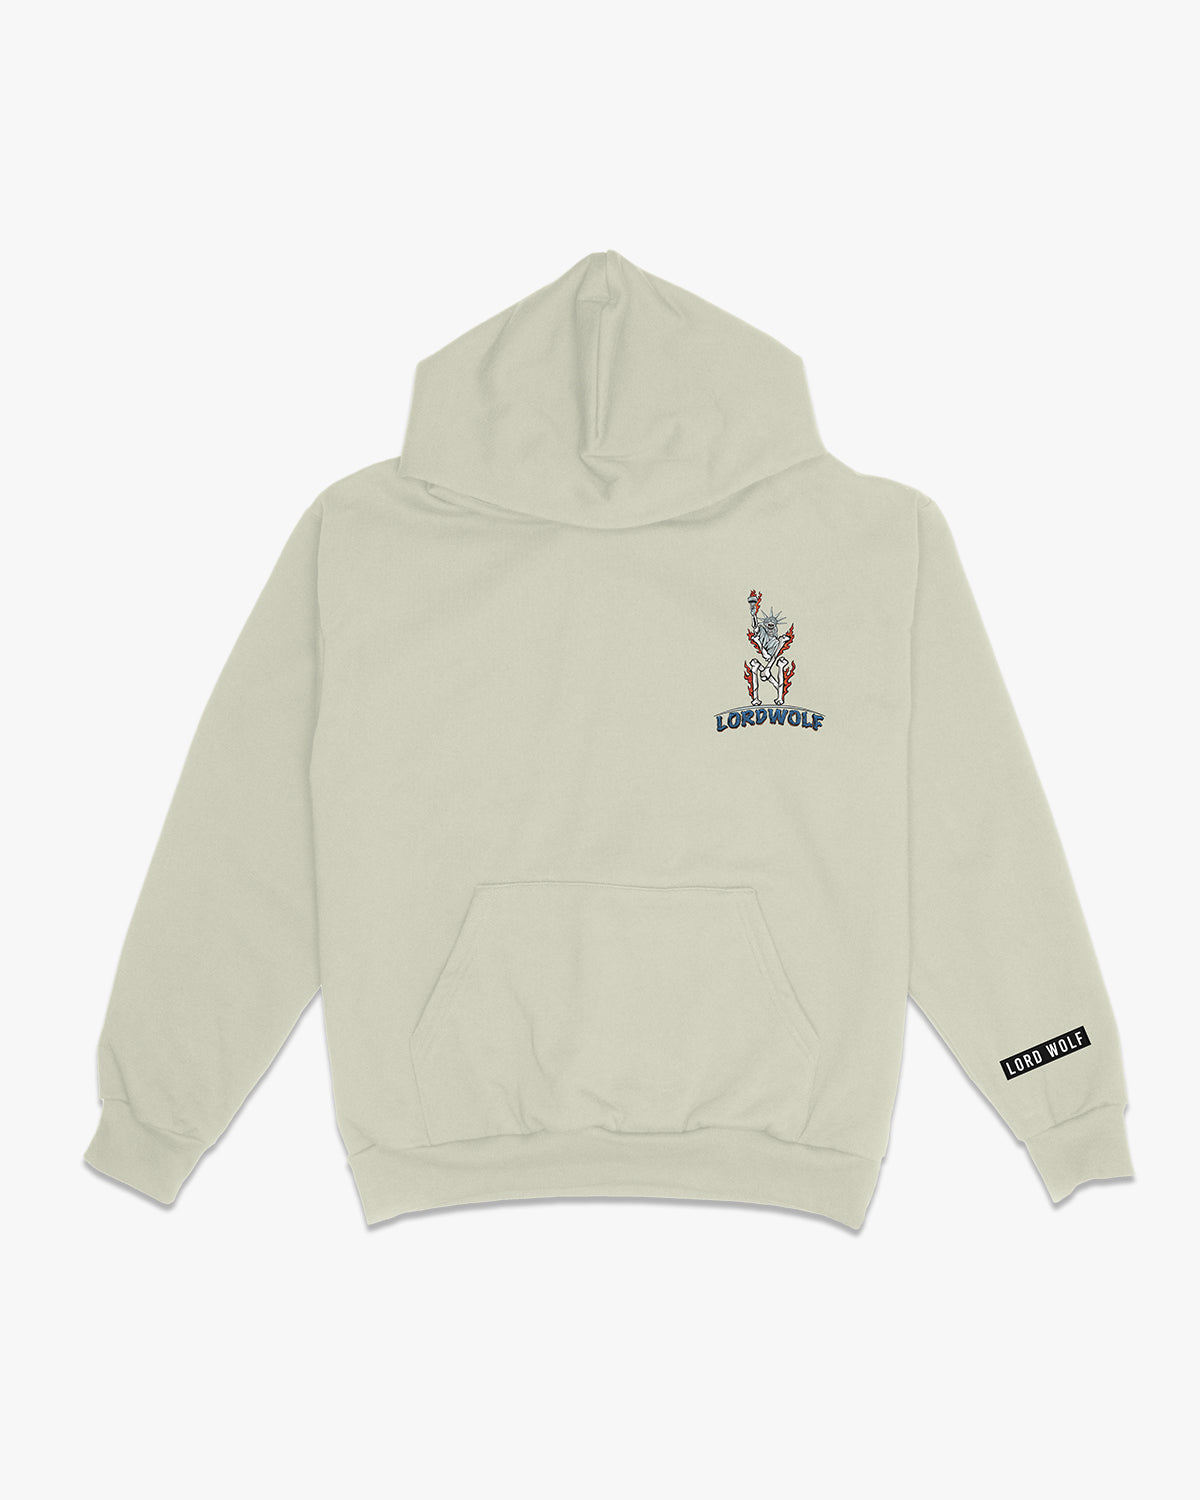 NY City of Wolves Hoodie - Beige